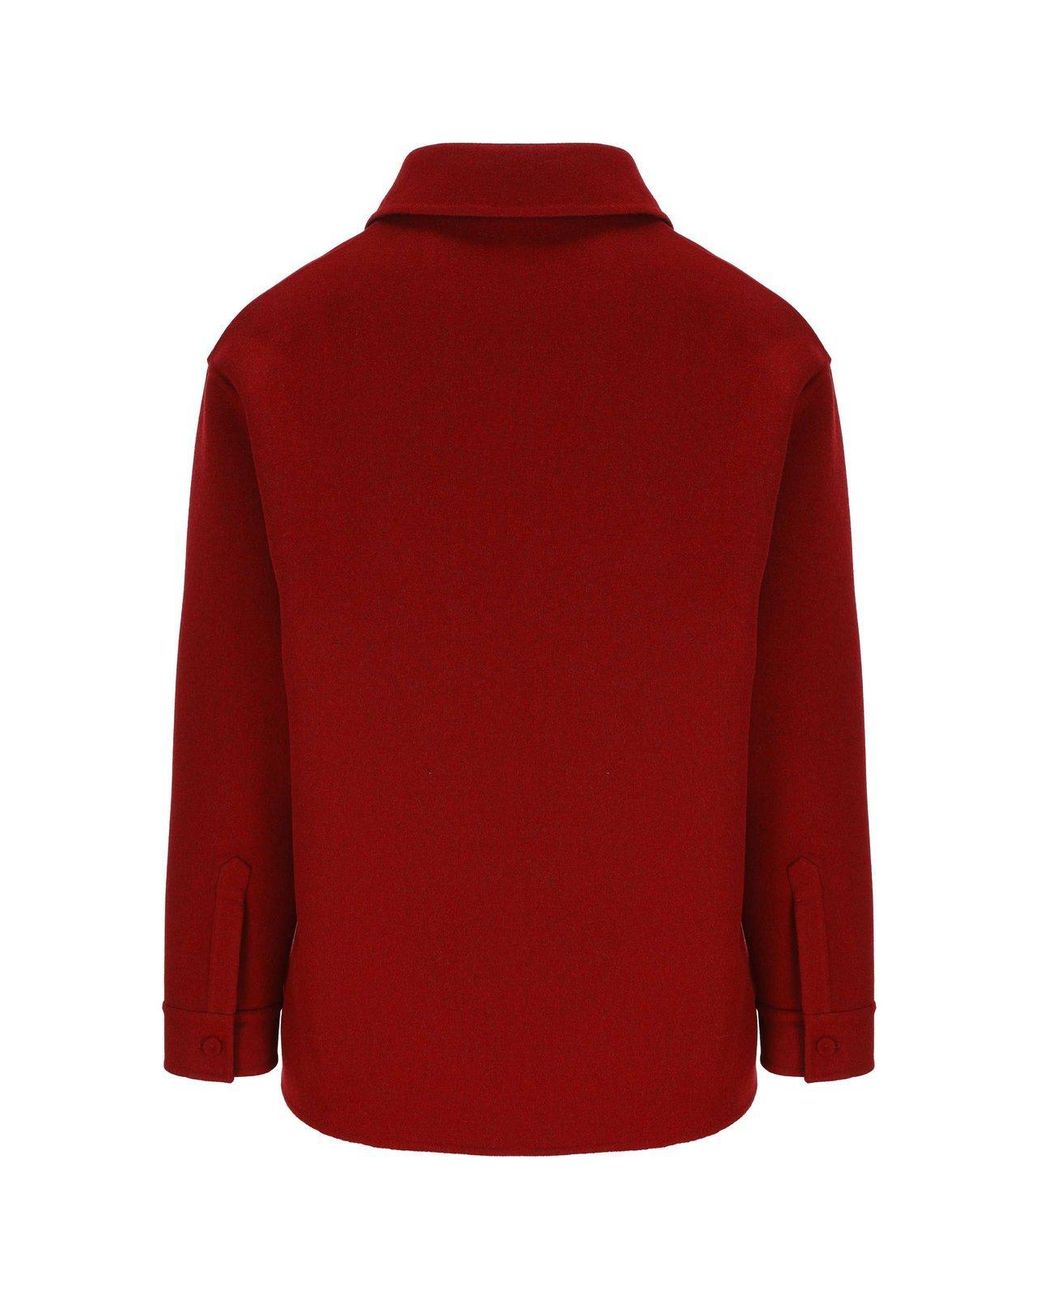 Fendi Reversible Button-up Jacket in Red for Men | Lyst